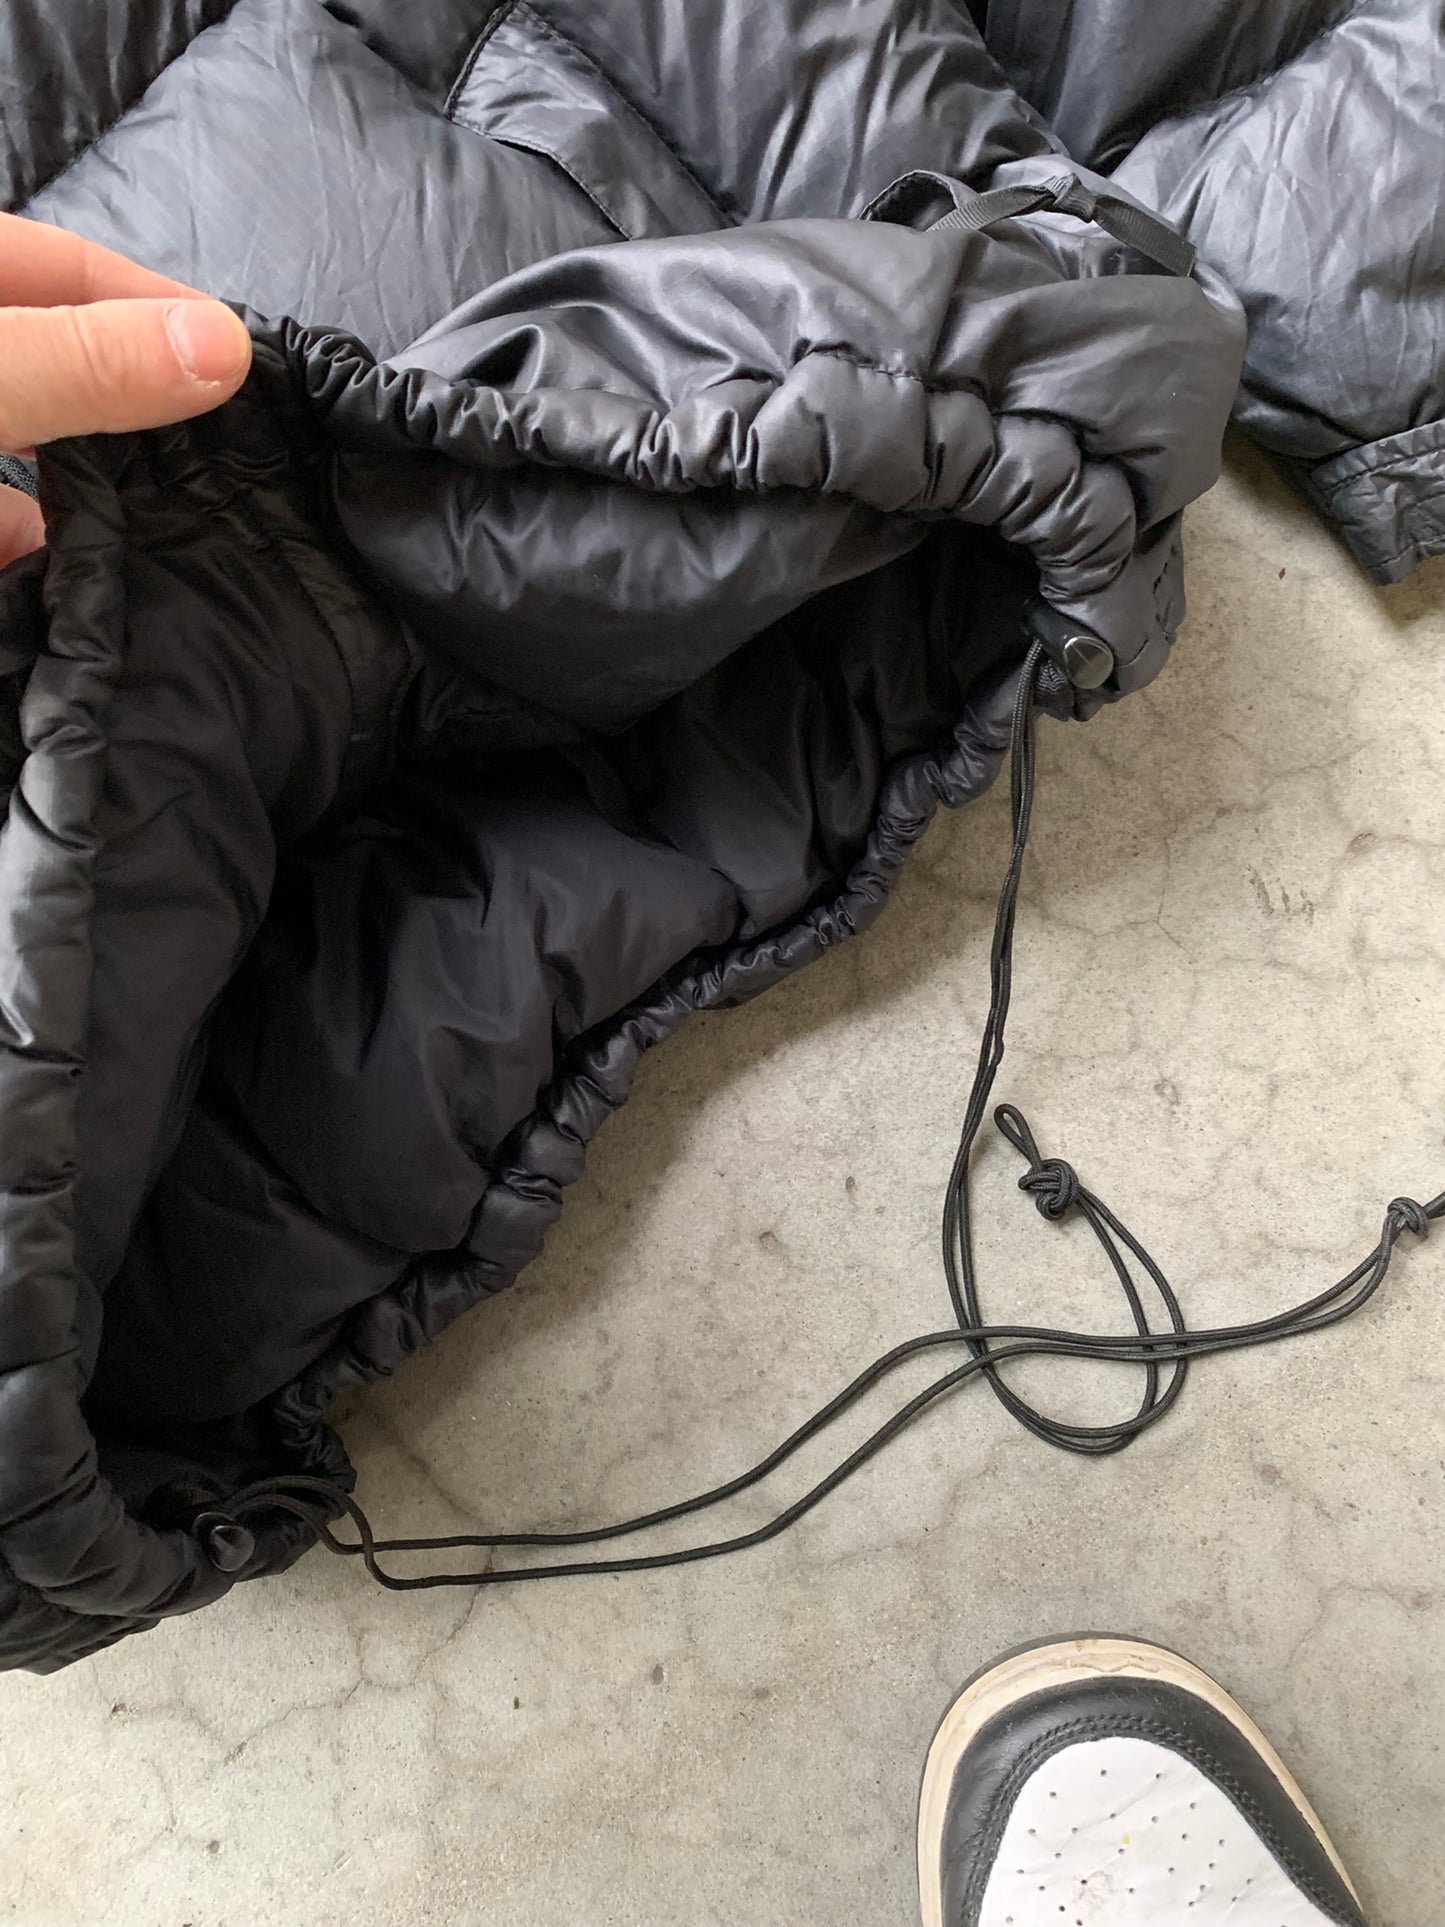 (L) The North Face 700 Down Puffer Black